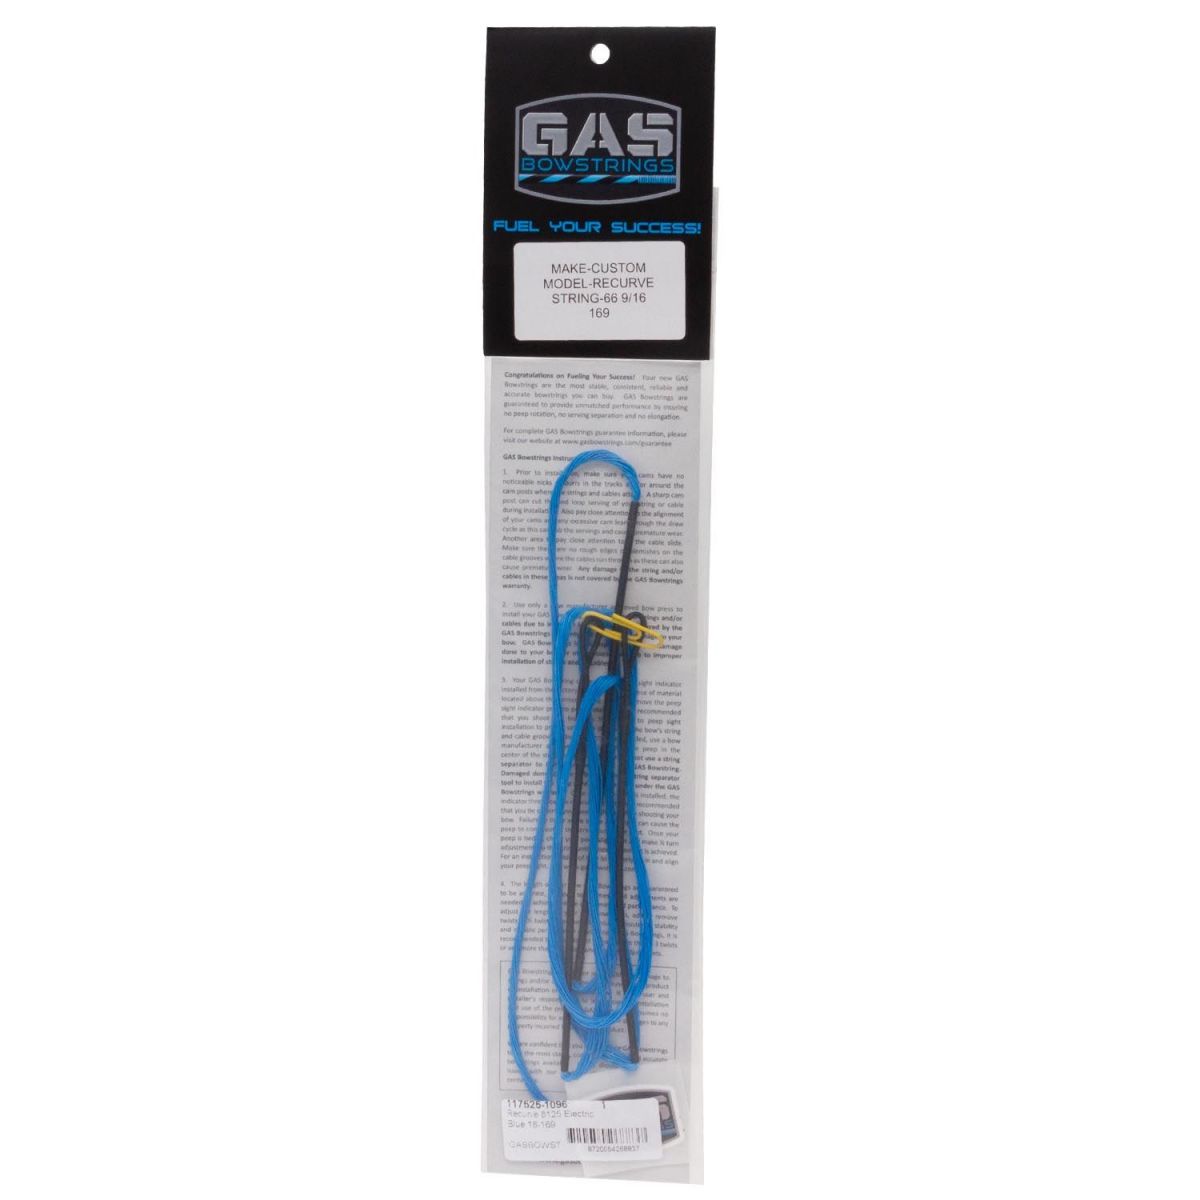 GAS Bowstrings Recurve String 8125 Electric Blue